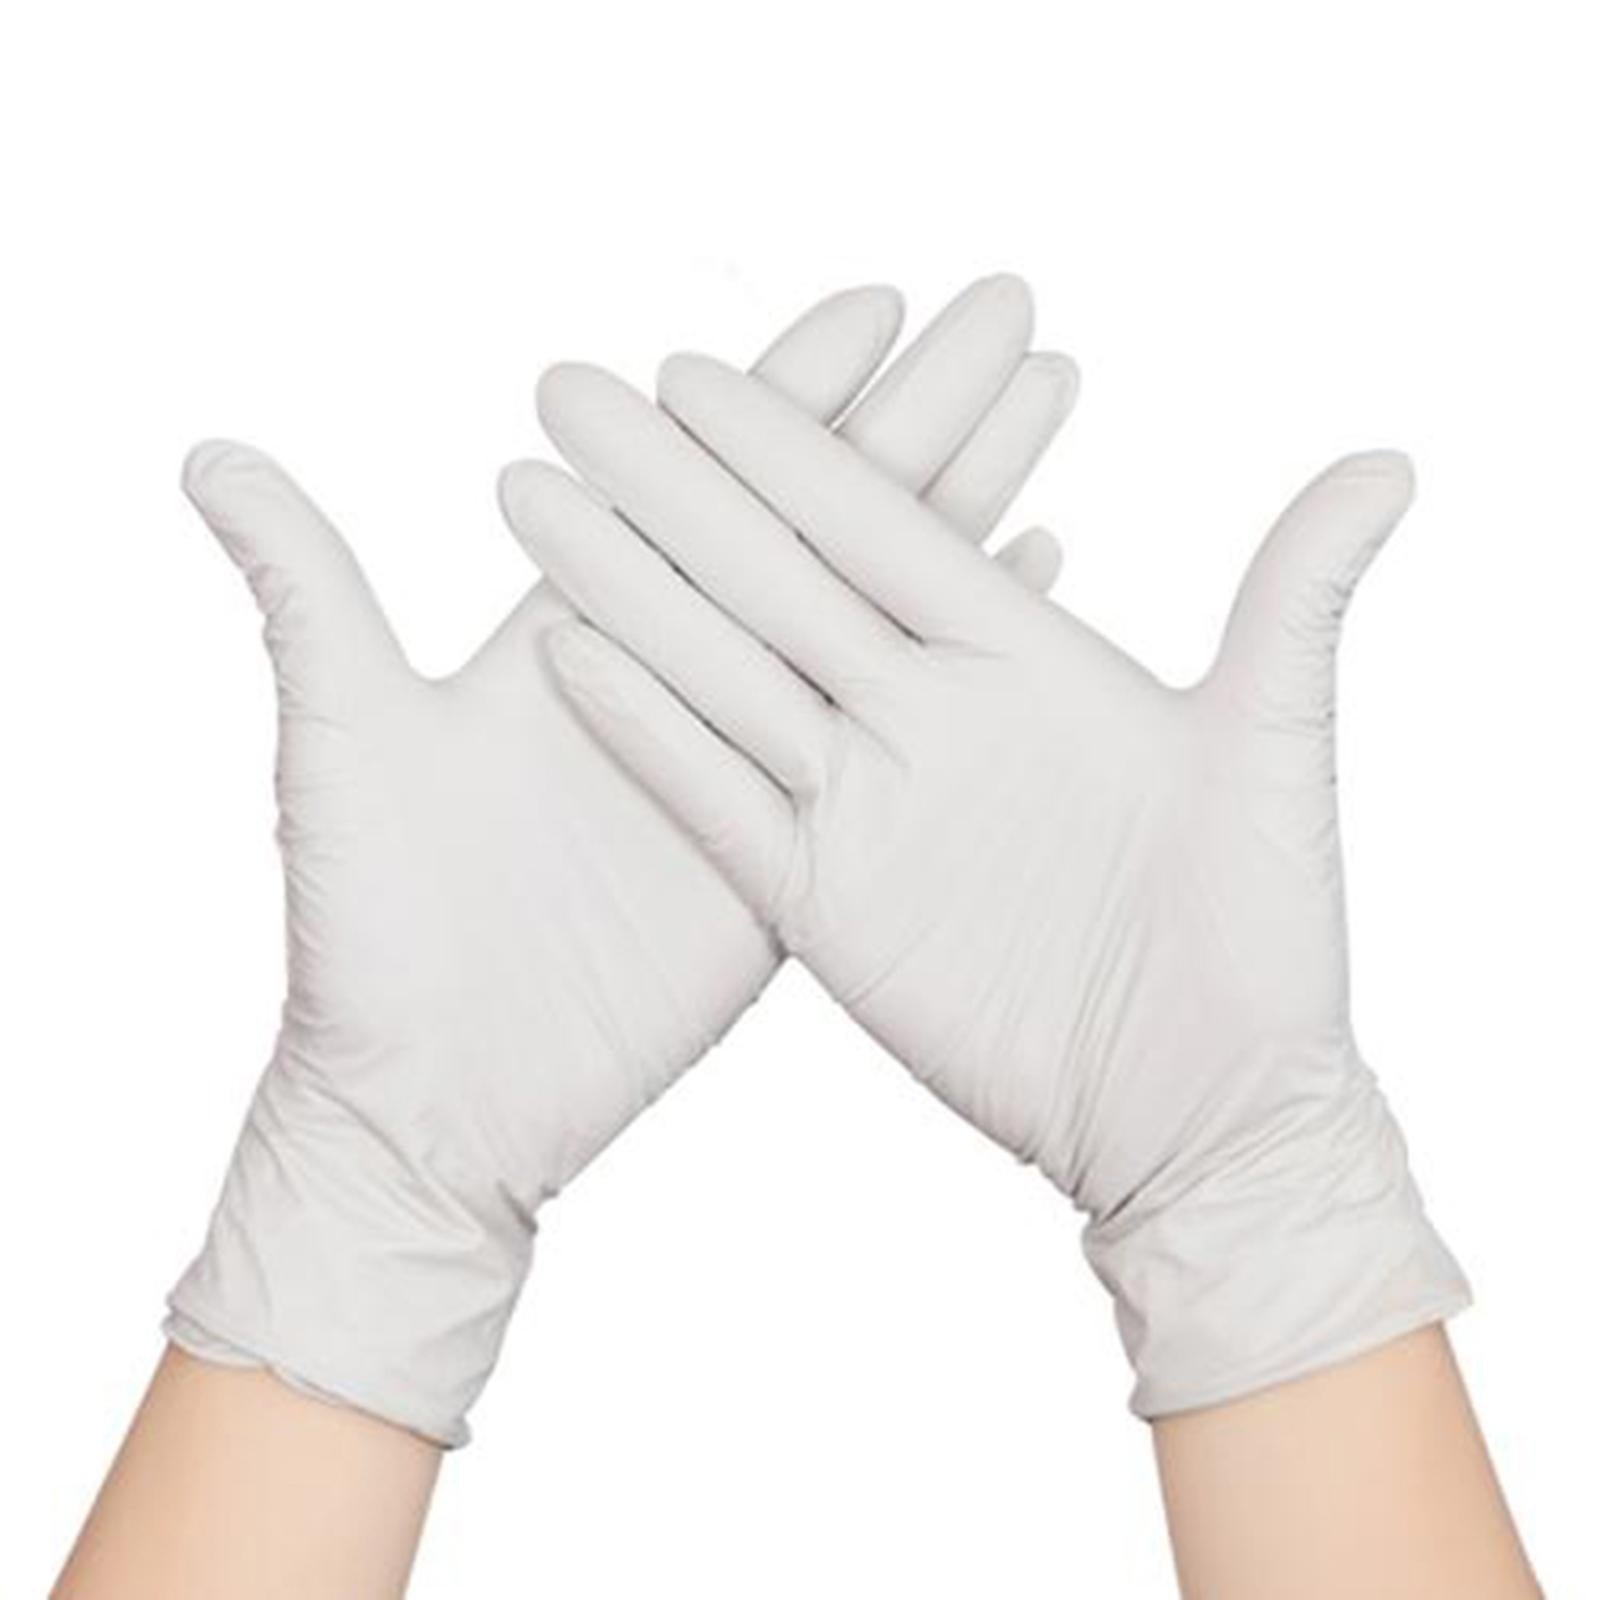 10Pcs Strong Nitrile Gloves Powder Free Pet Care Protective Gloves White S